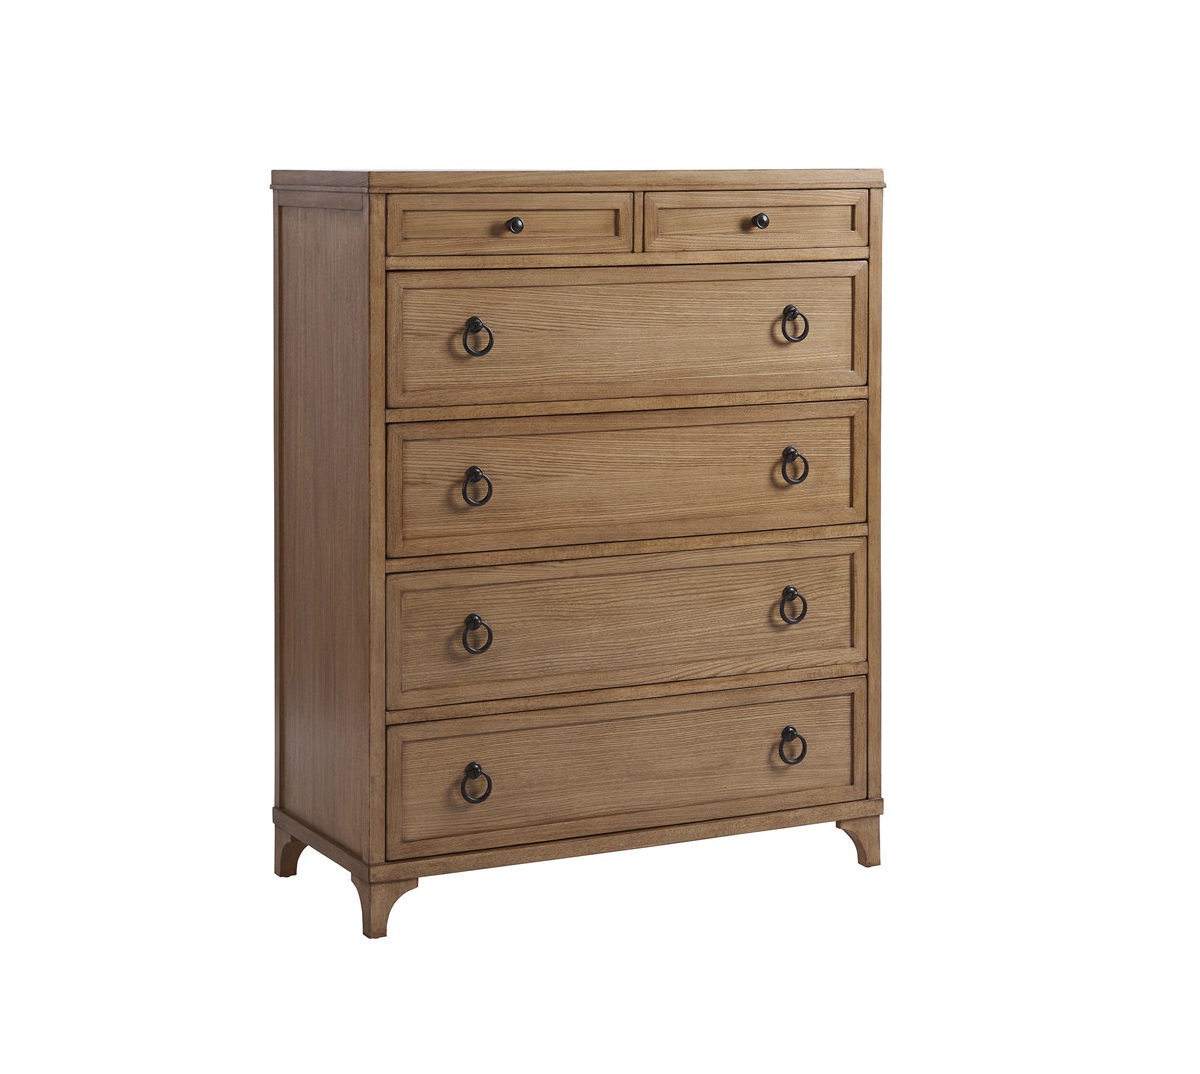 Goldenrod Chest, Lexington Traditional Chest Of Drawers Furniture, Brooklyn, New York, Furniture By ABD